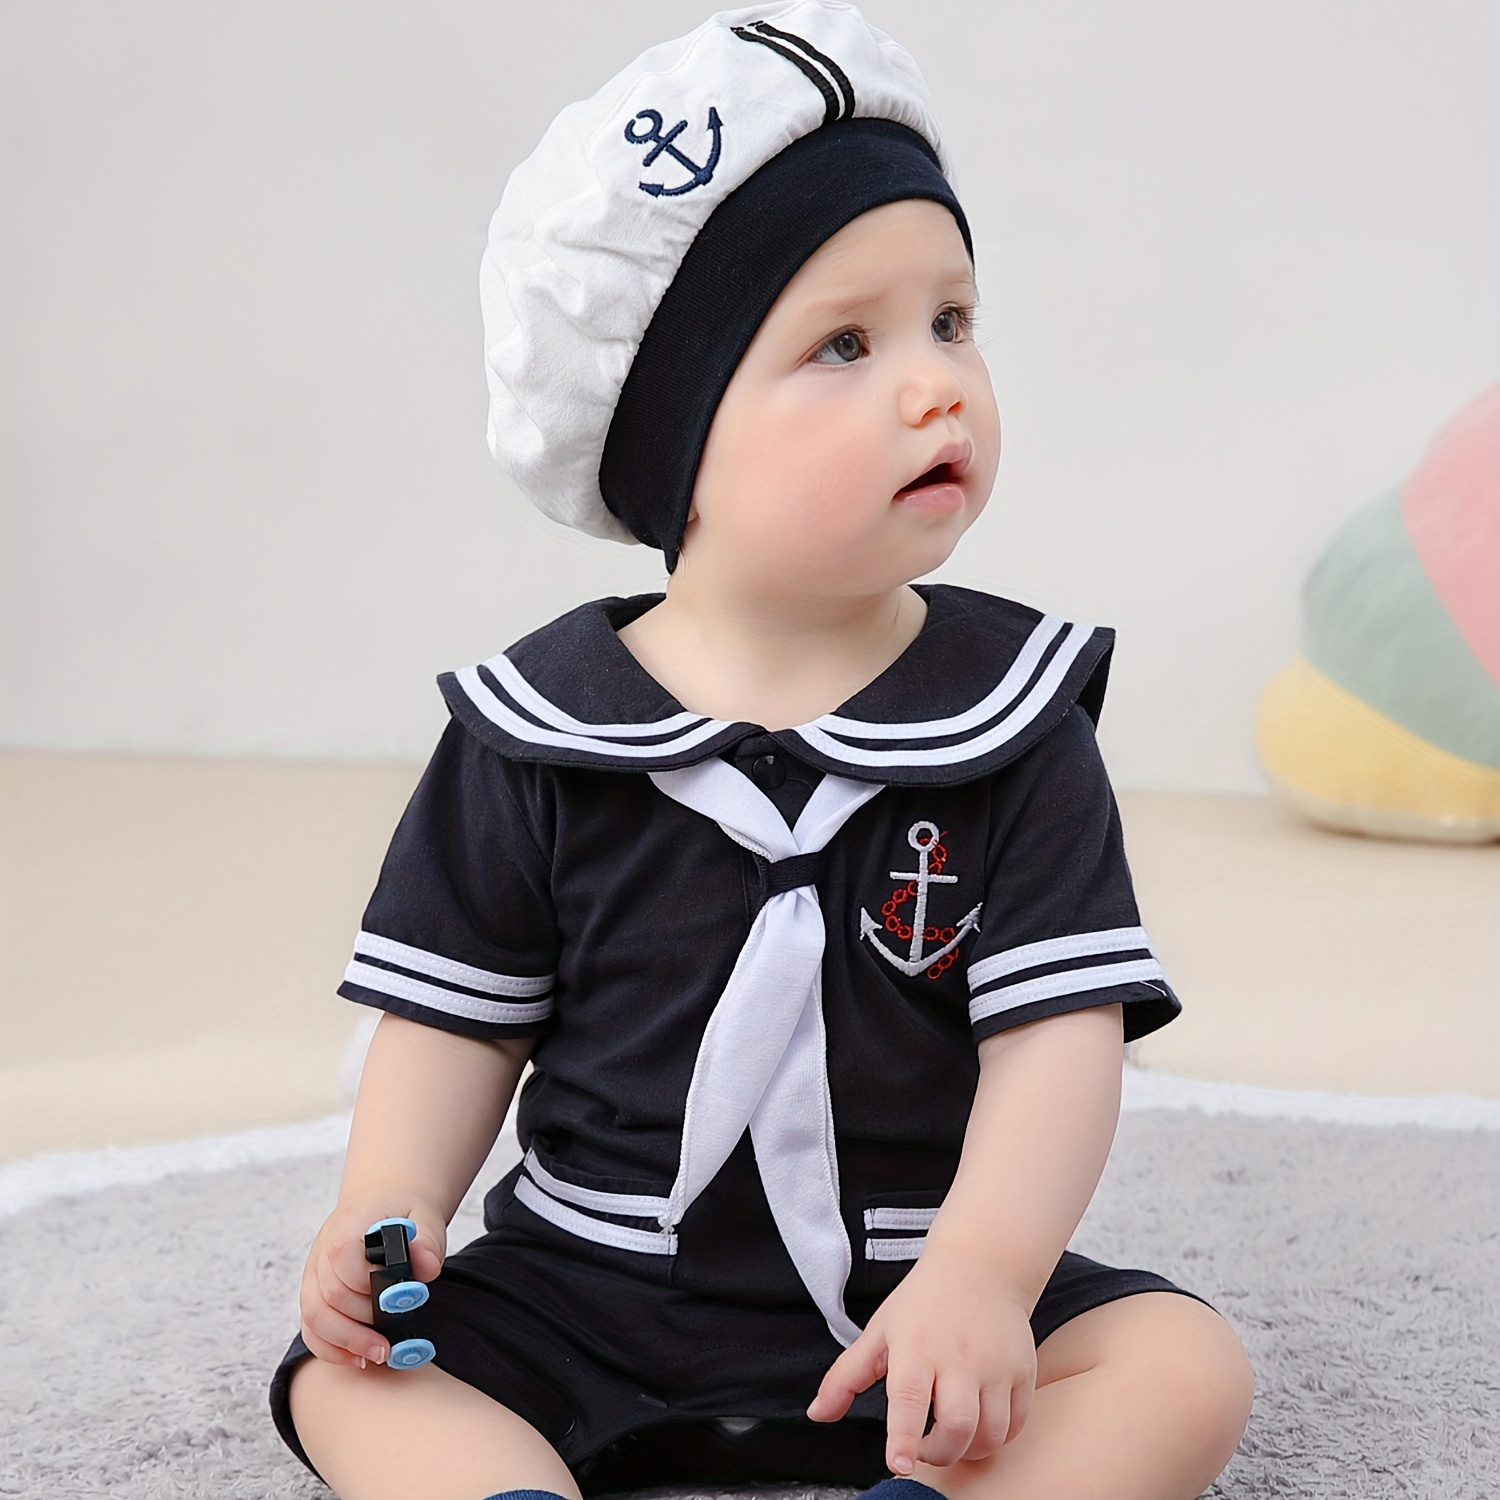 

Cute Baby Boys Cotton Sailor Clothing - Cartoon Anchor Embroidered Bodysuit & Hat Set, Creative Short Sleeve Romper, Toddler & Infant Boy's Clothing, As Gift